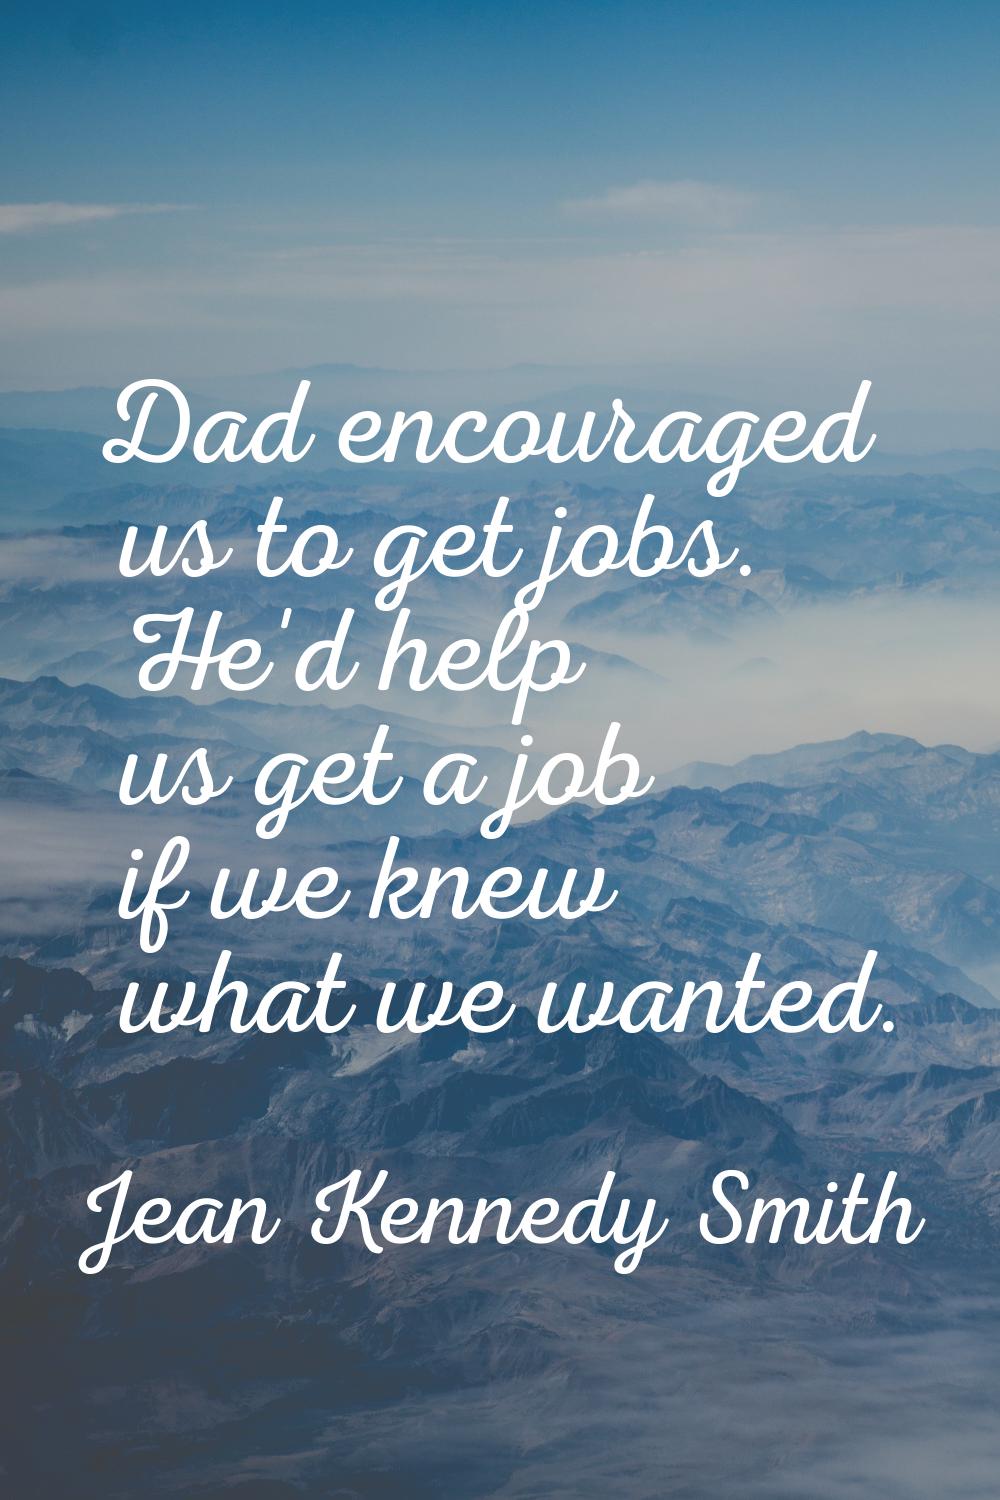 Dad encouraged us to get jobs. He'd help us get a job if we knew what we wanted.